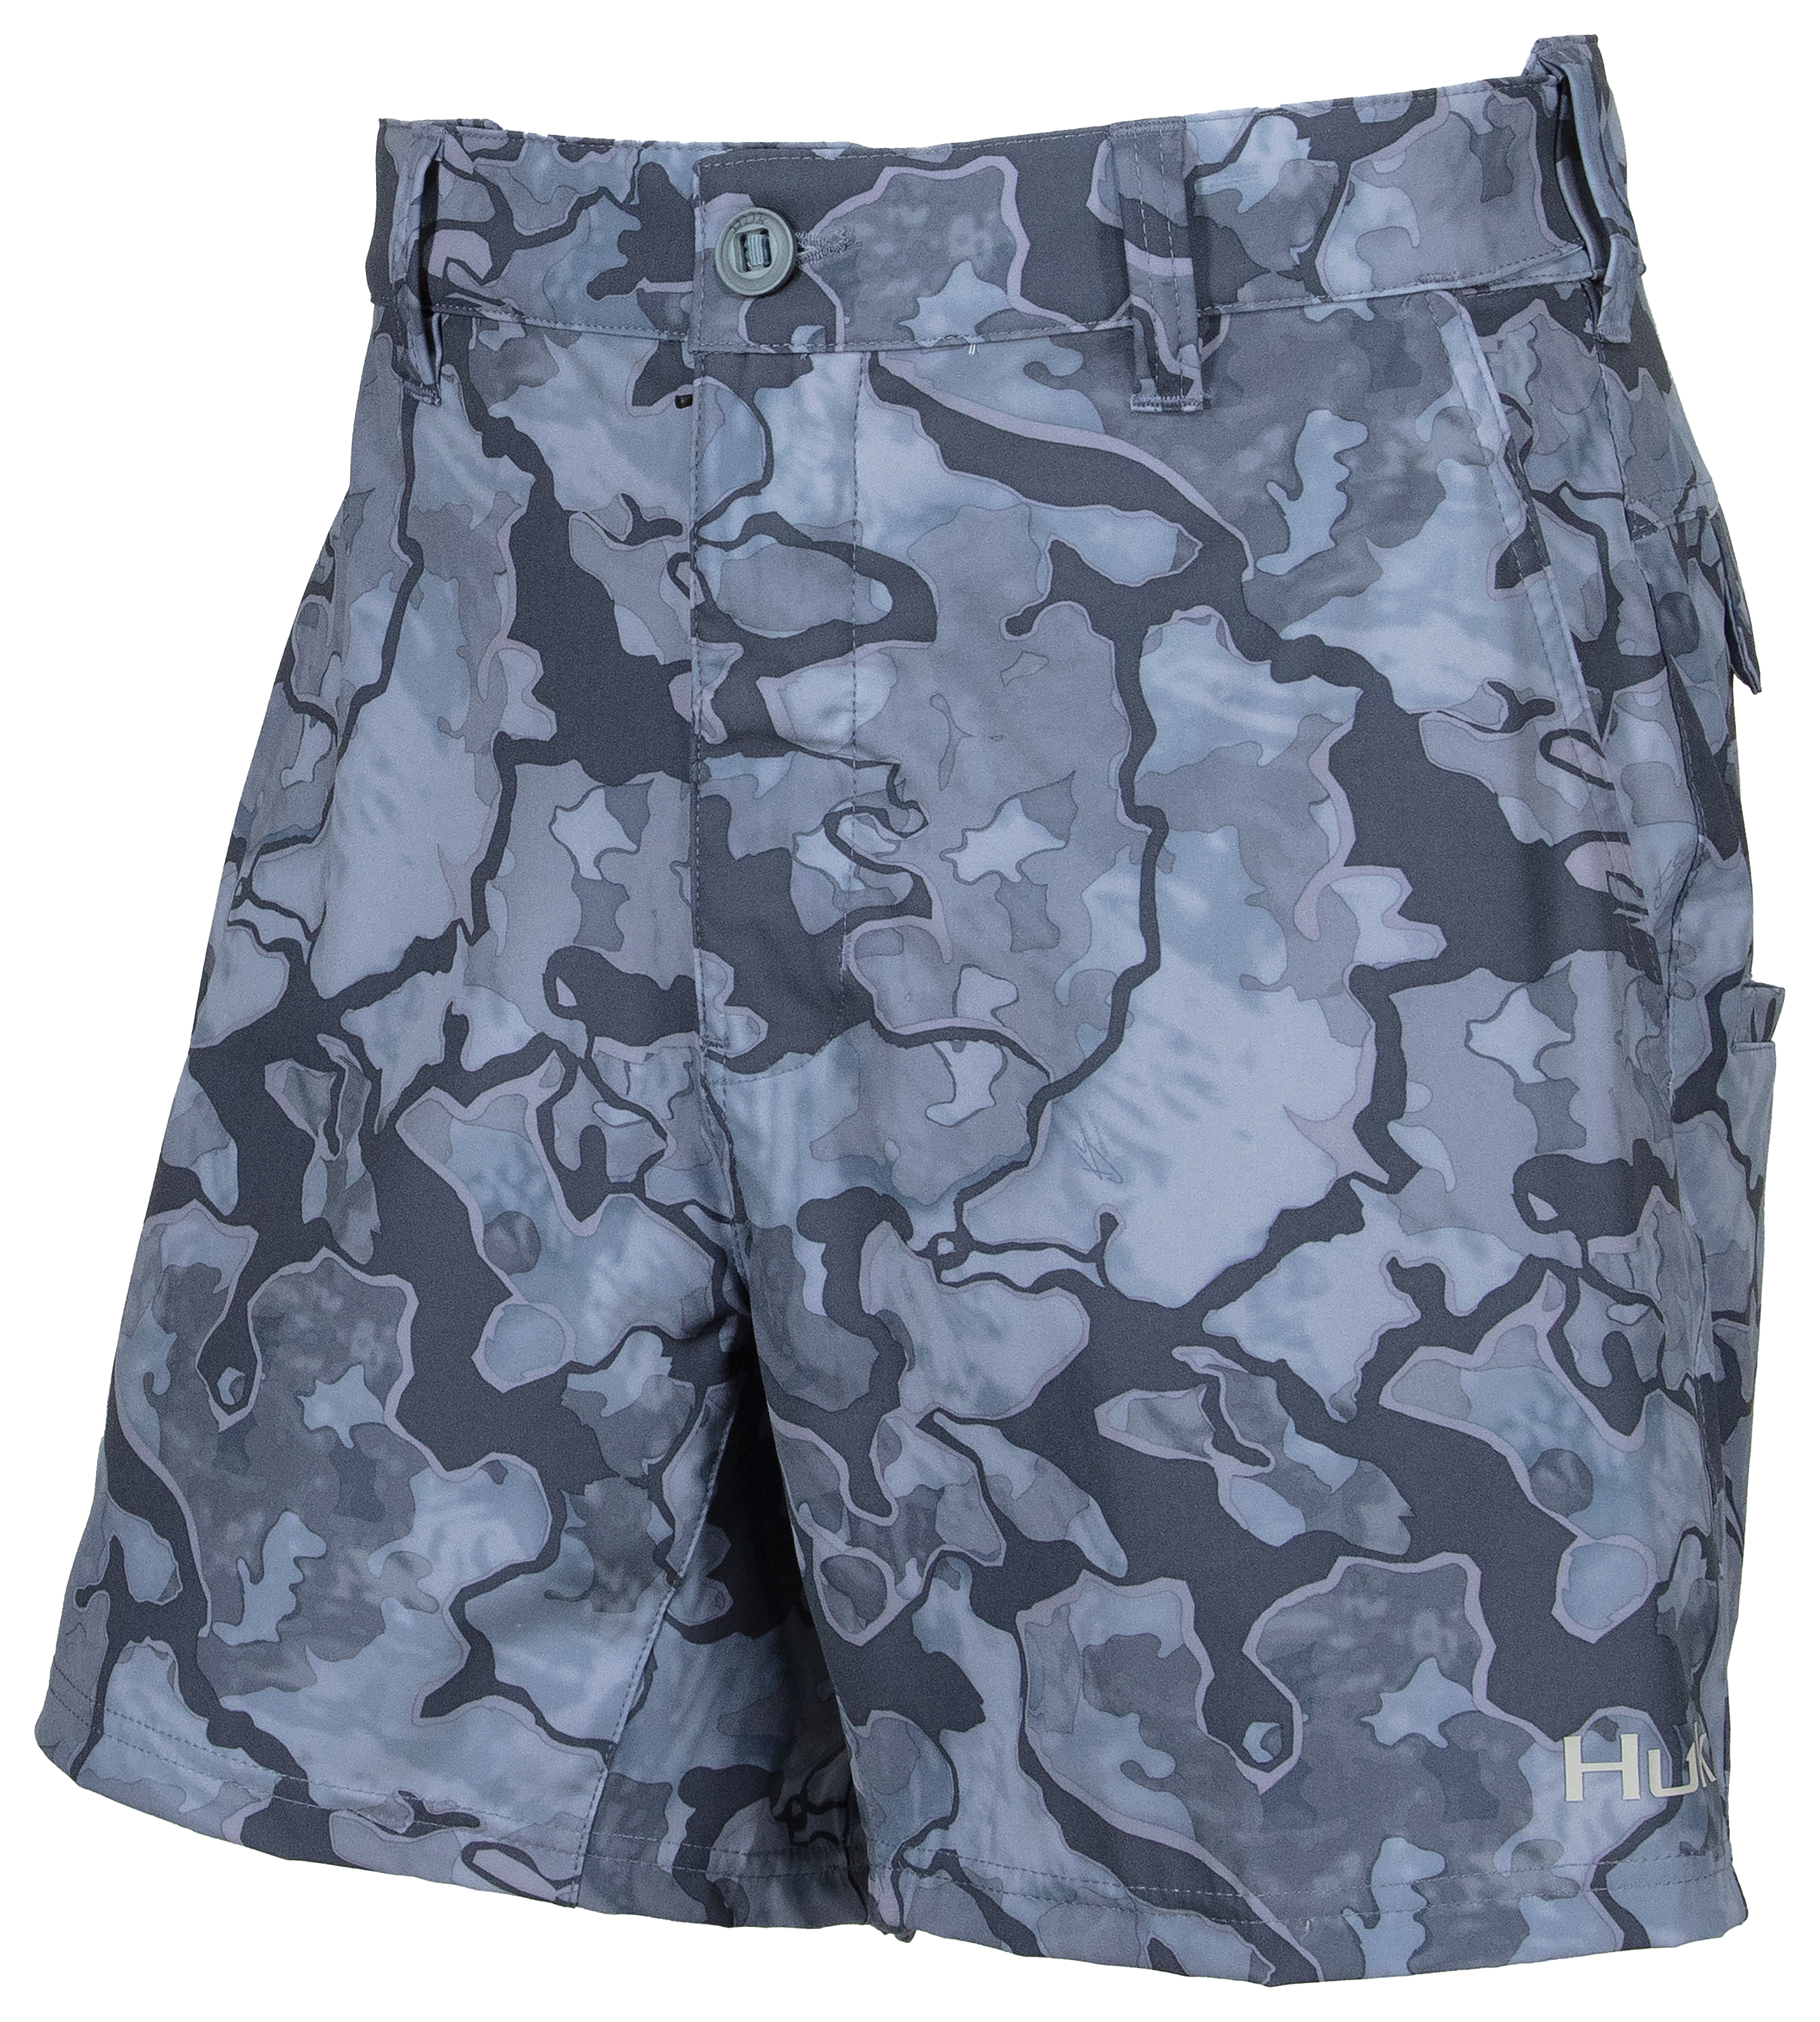 Huk Low Country Camo Shorts for Men